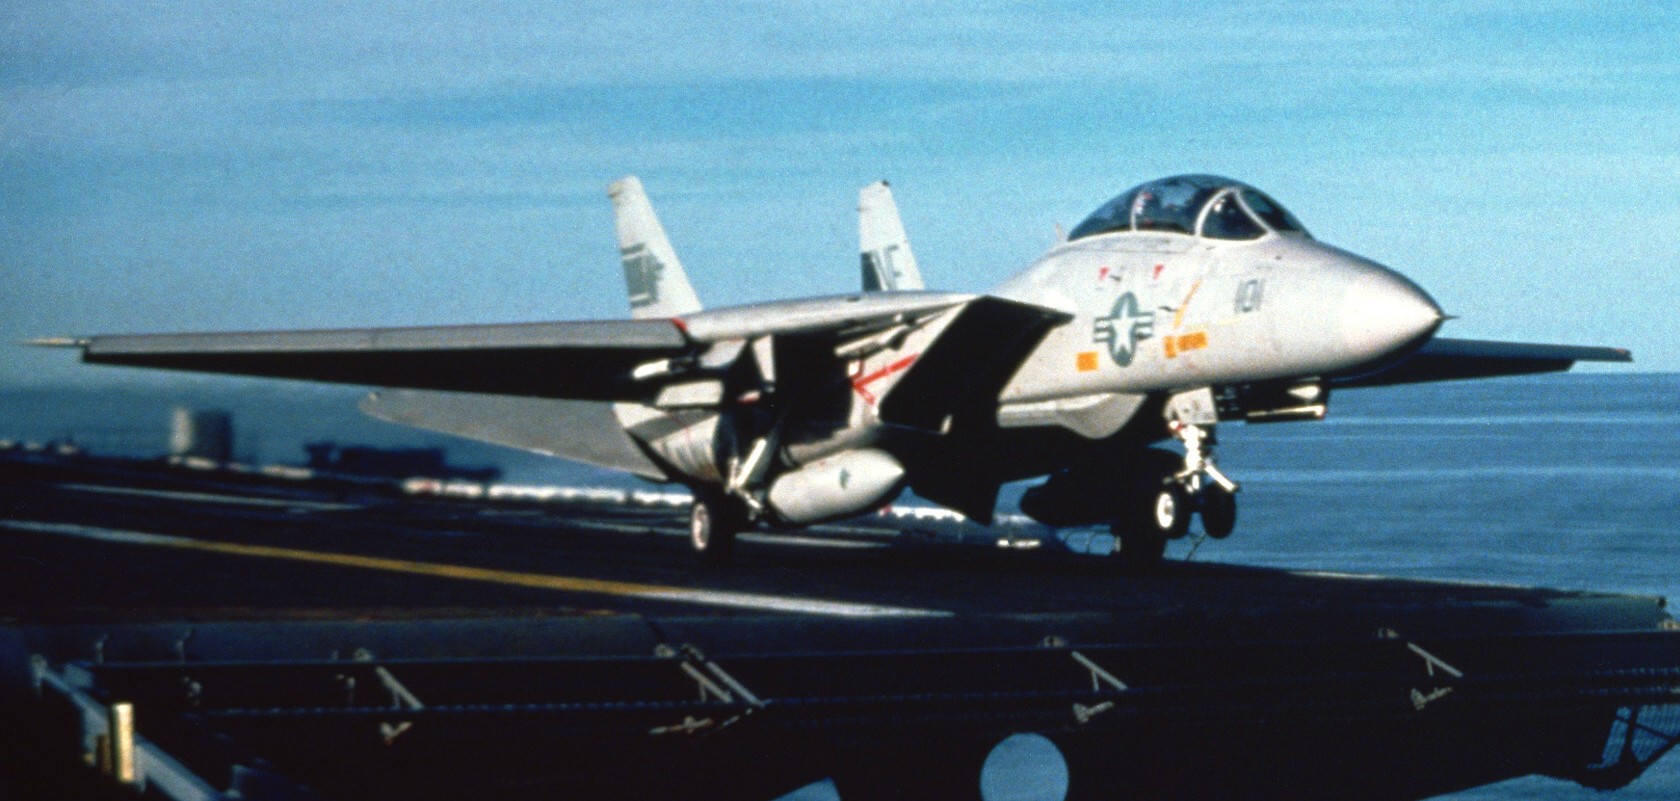 vf-1 wolfpack fighter squadron f-14a tomcat carrier air wing cvw-2 uss ranger cv-61 44